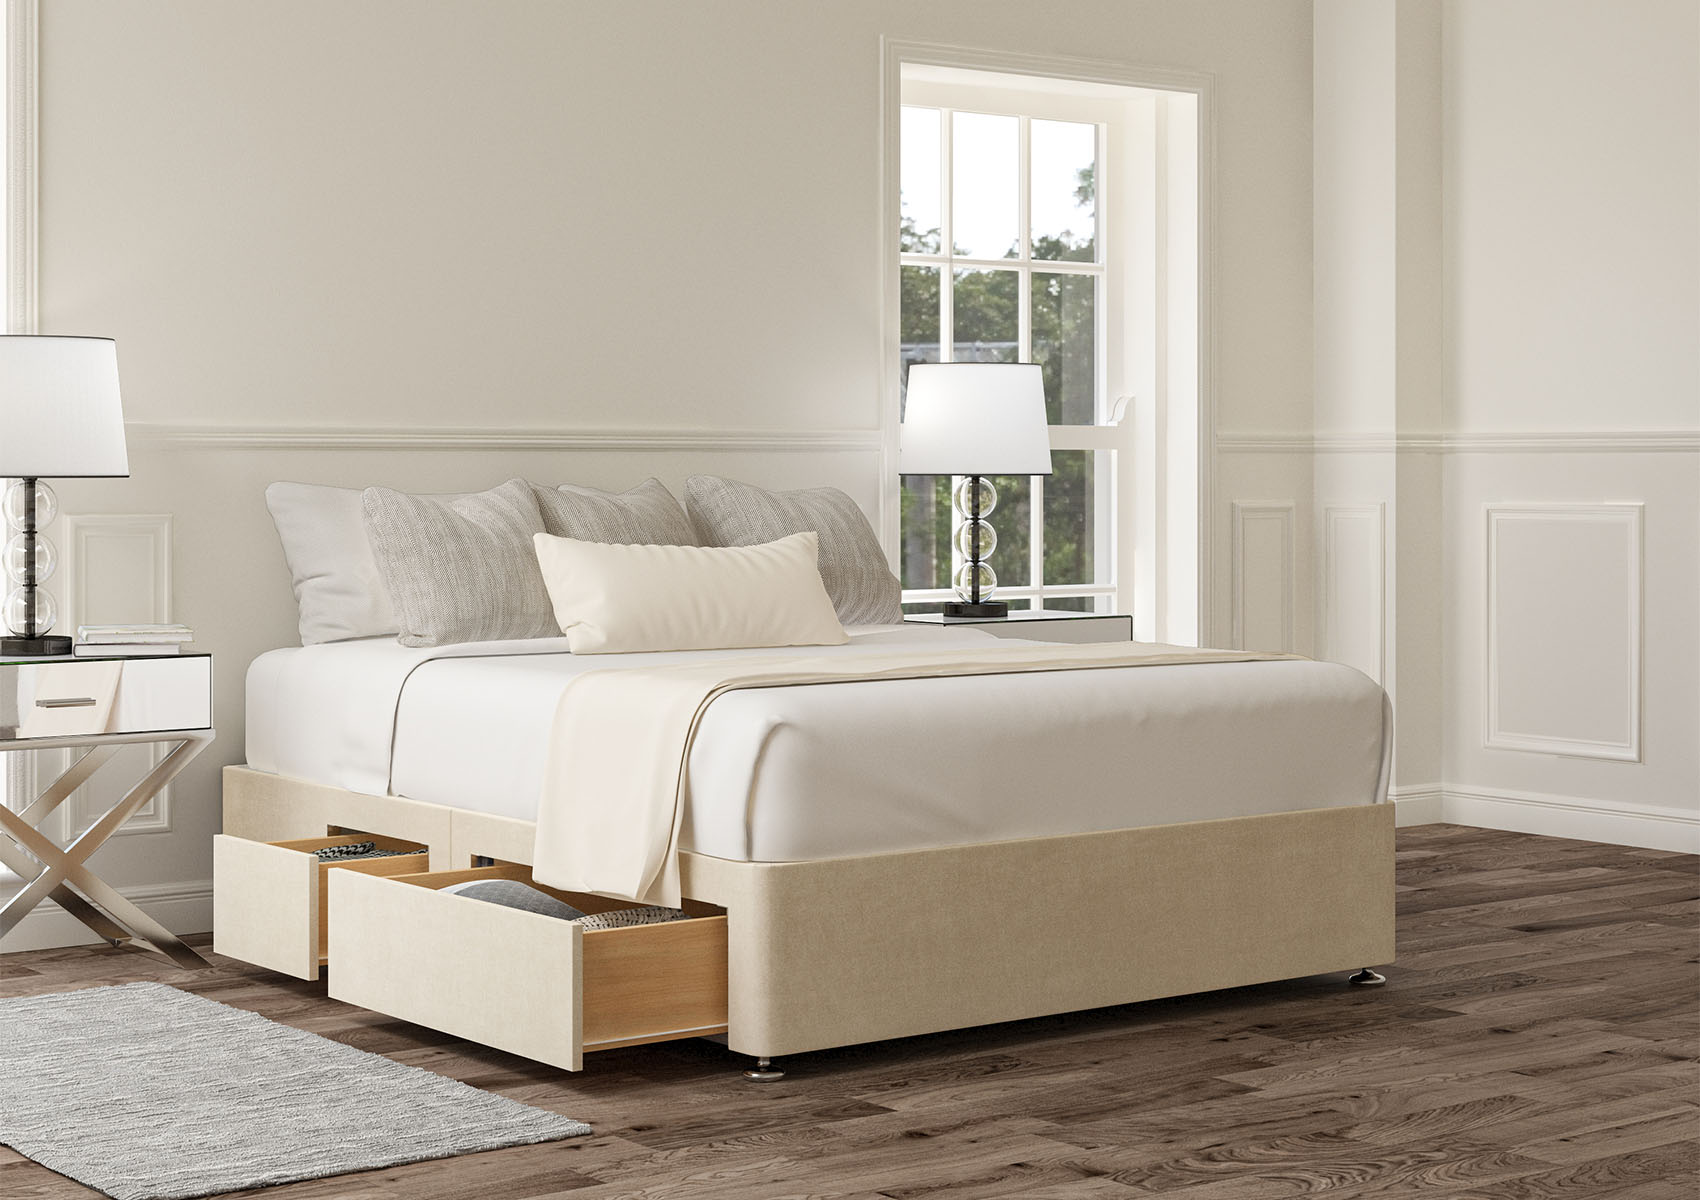 View 22 Carina Parchment Upholstered Super King Storage Bed Time4Sleep information